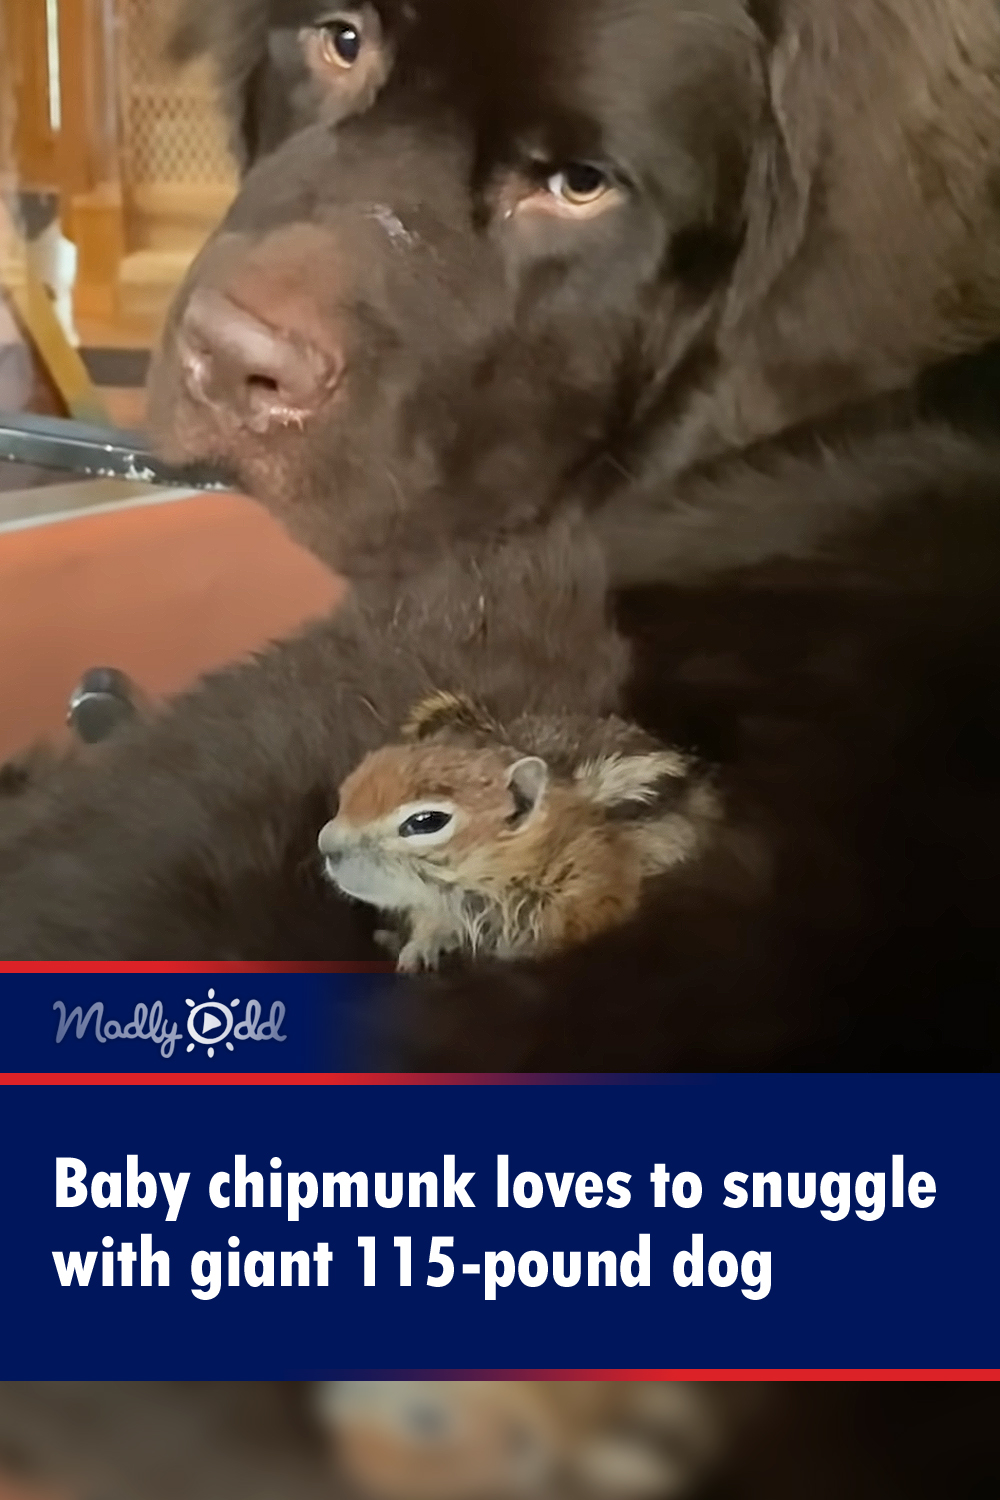 Baby chipmunk loves to snuggle with giant 115-pound dog